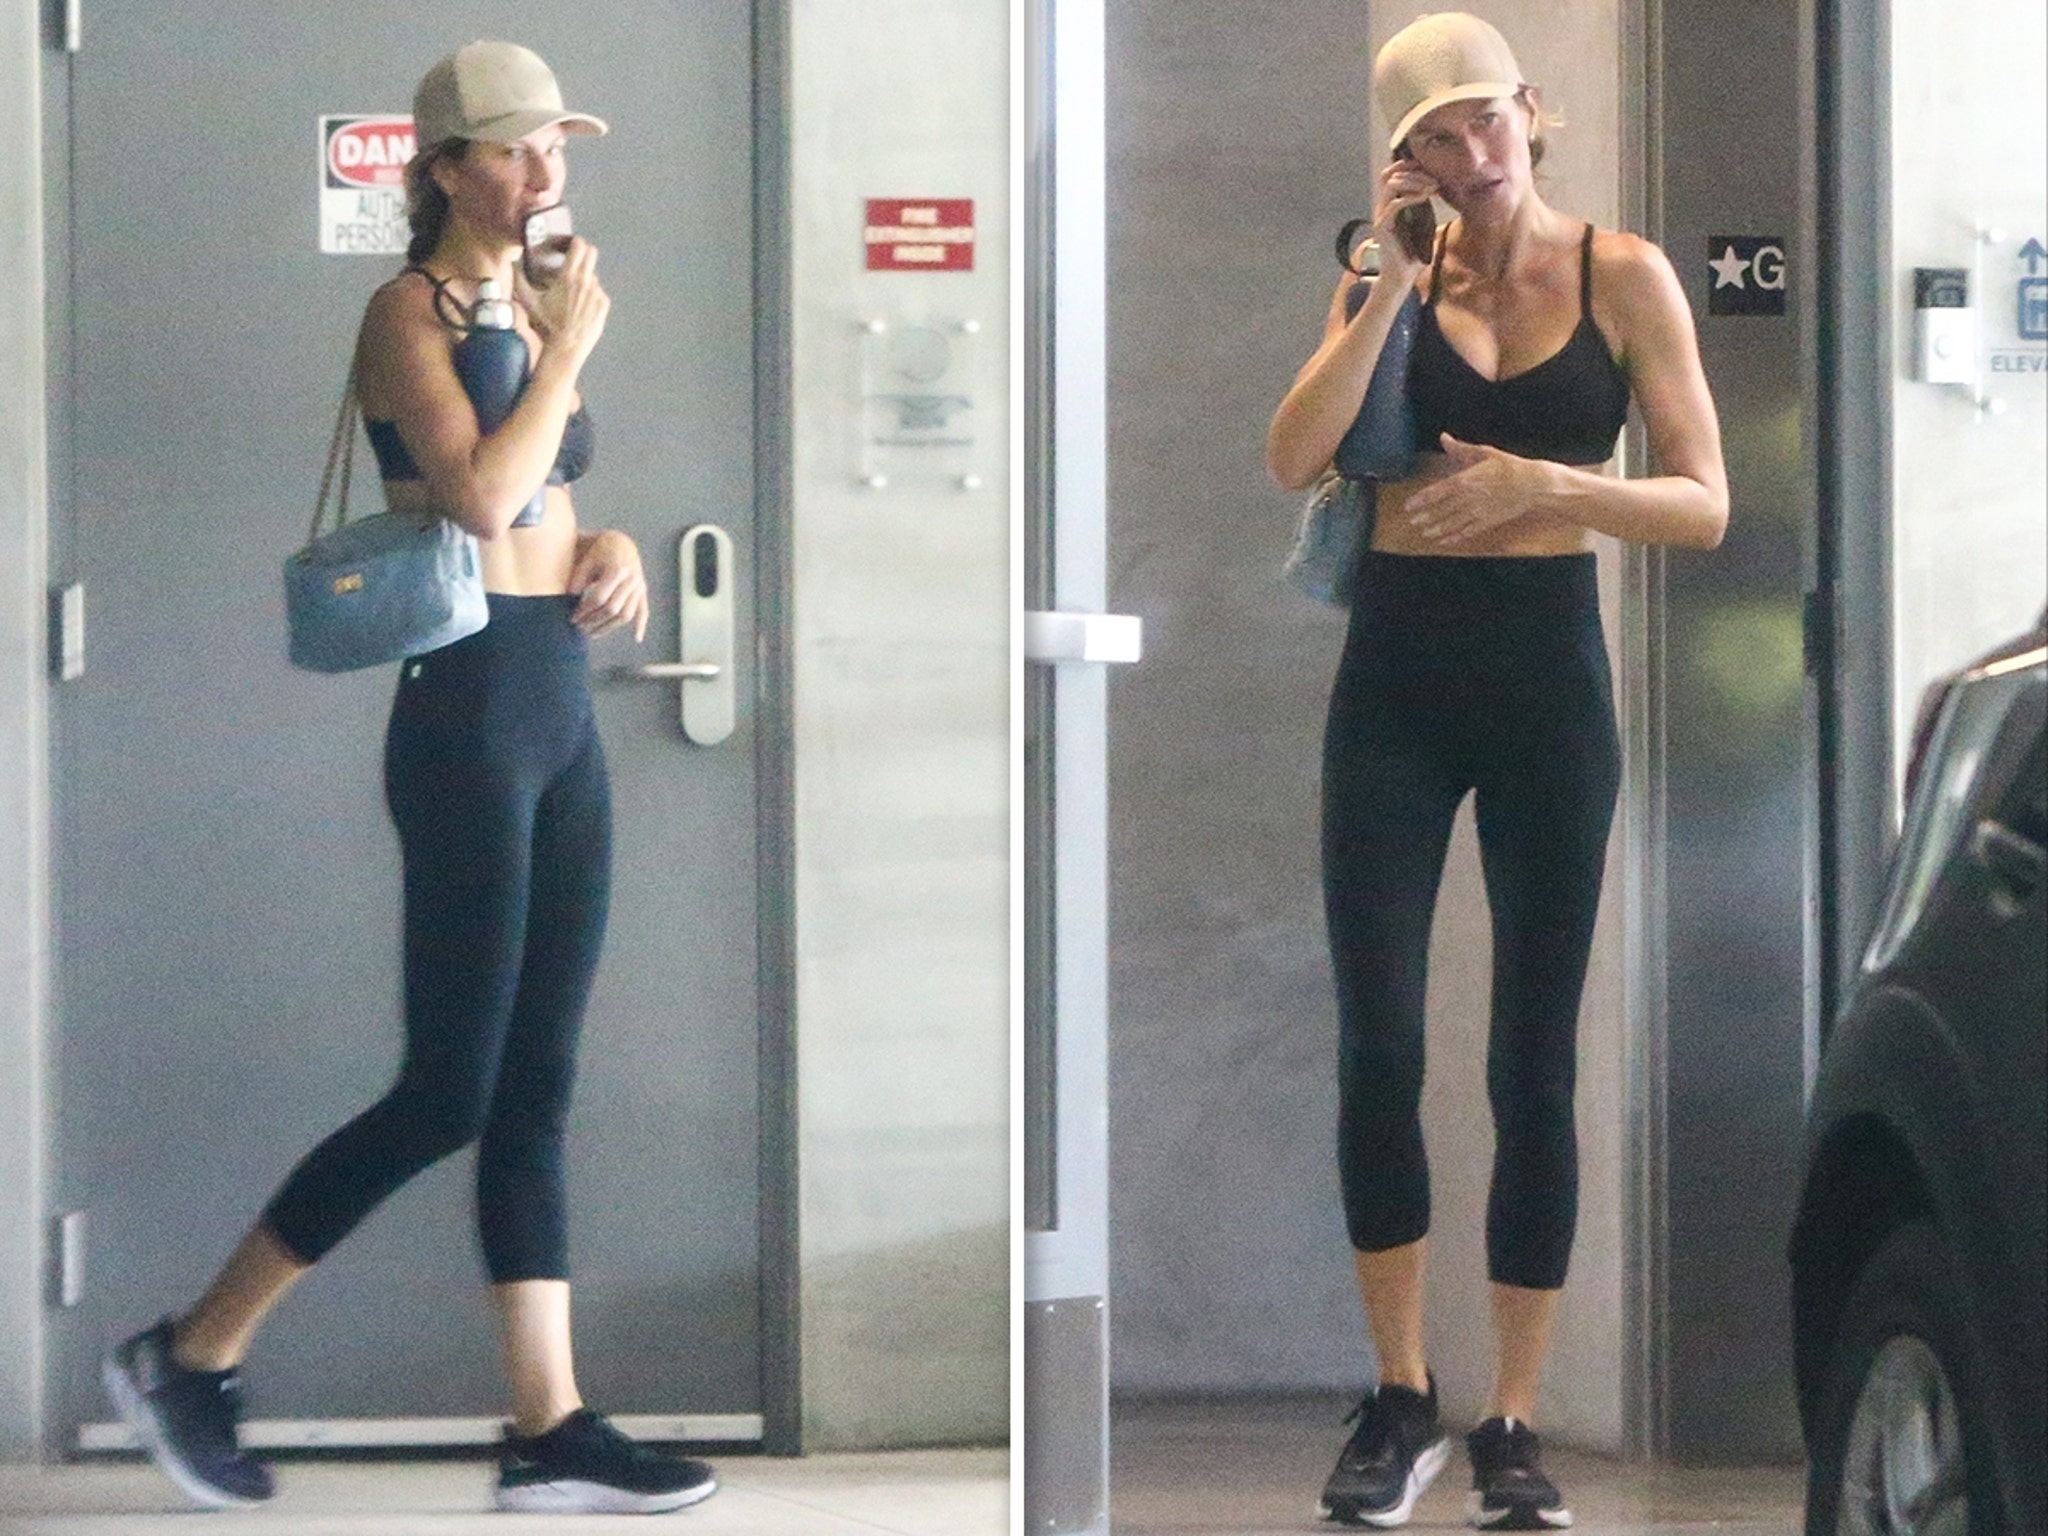 Gisele Bündchen Hits Gym In Miami Amid Rumored Issues With Tom Brady - TMZ (Picture 1)